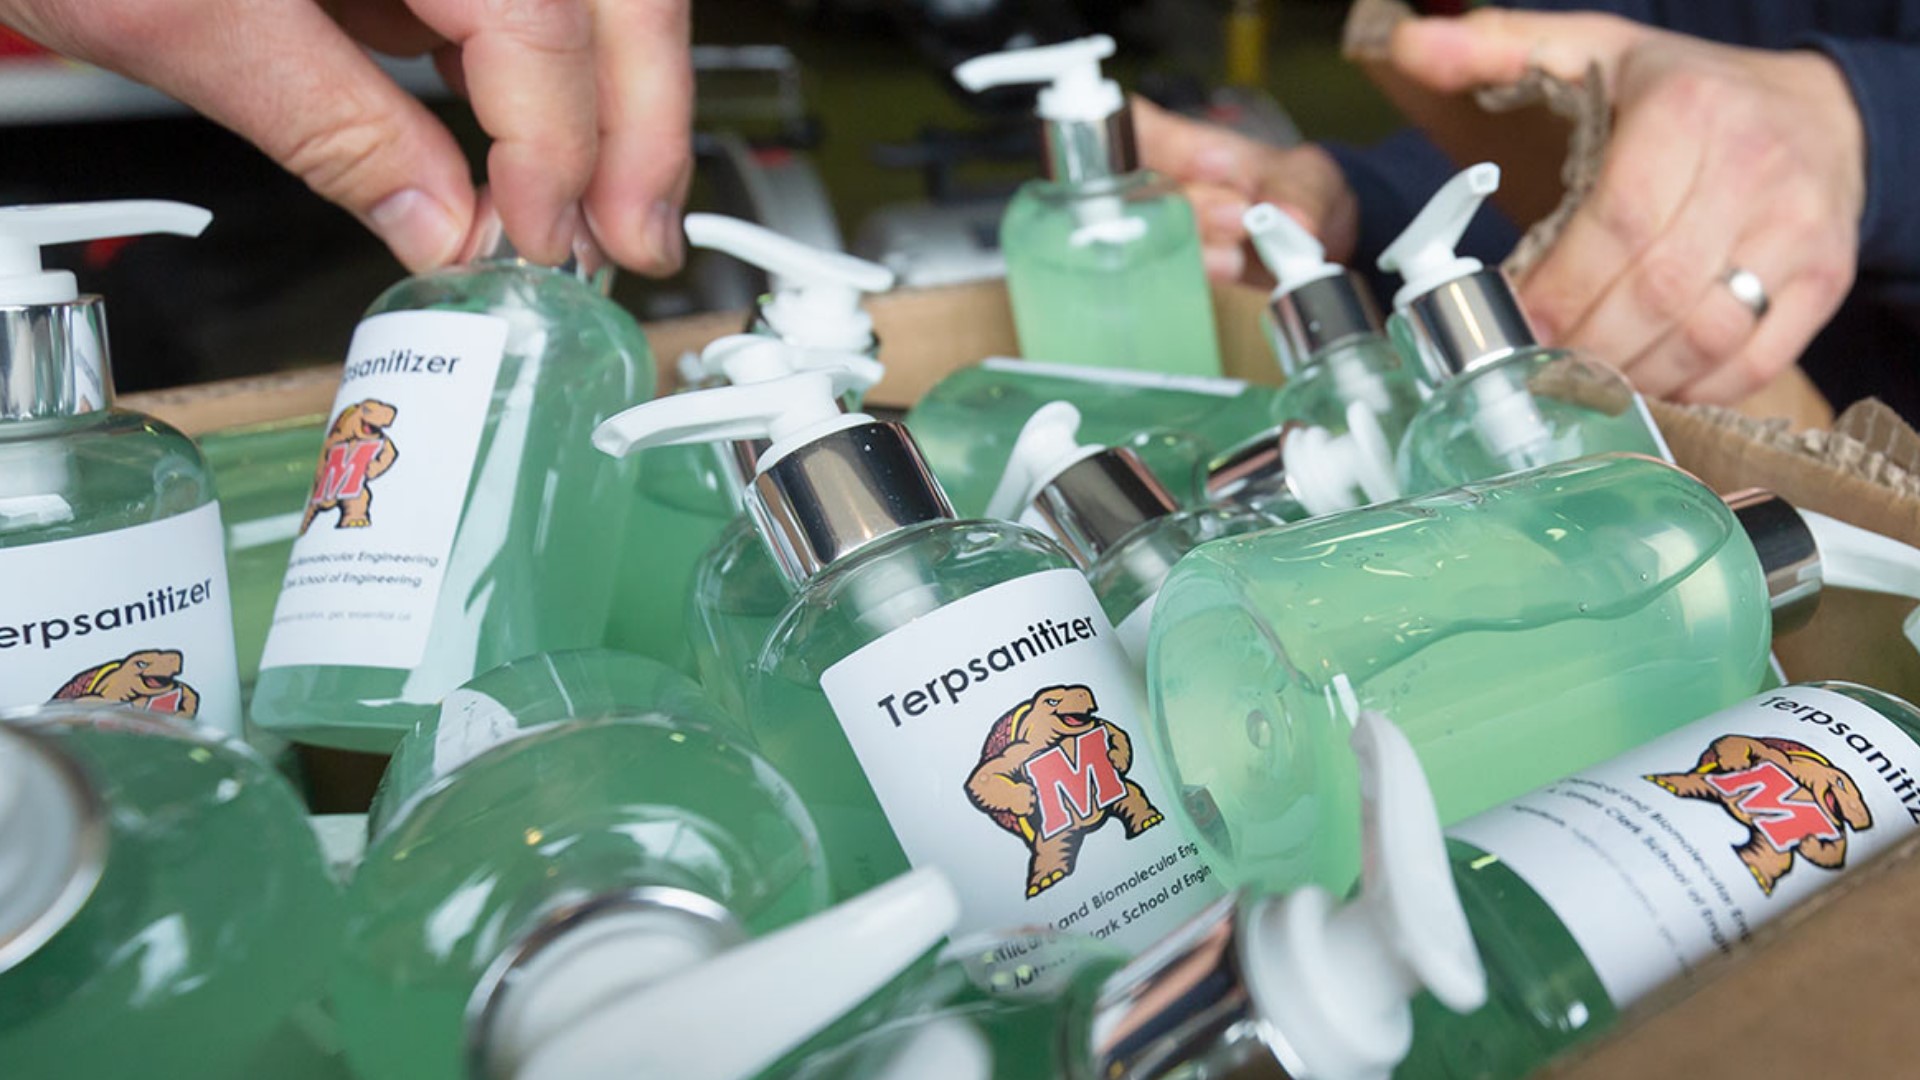 University of Maryland's Dr. Peter Kofinas, along with his students, are making face masks and "Terps Sanitizer" for the COVID-19 pandemic crisis.